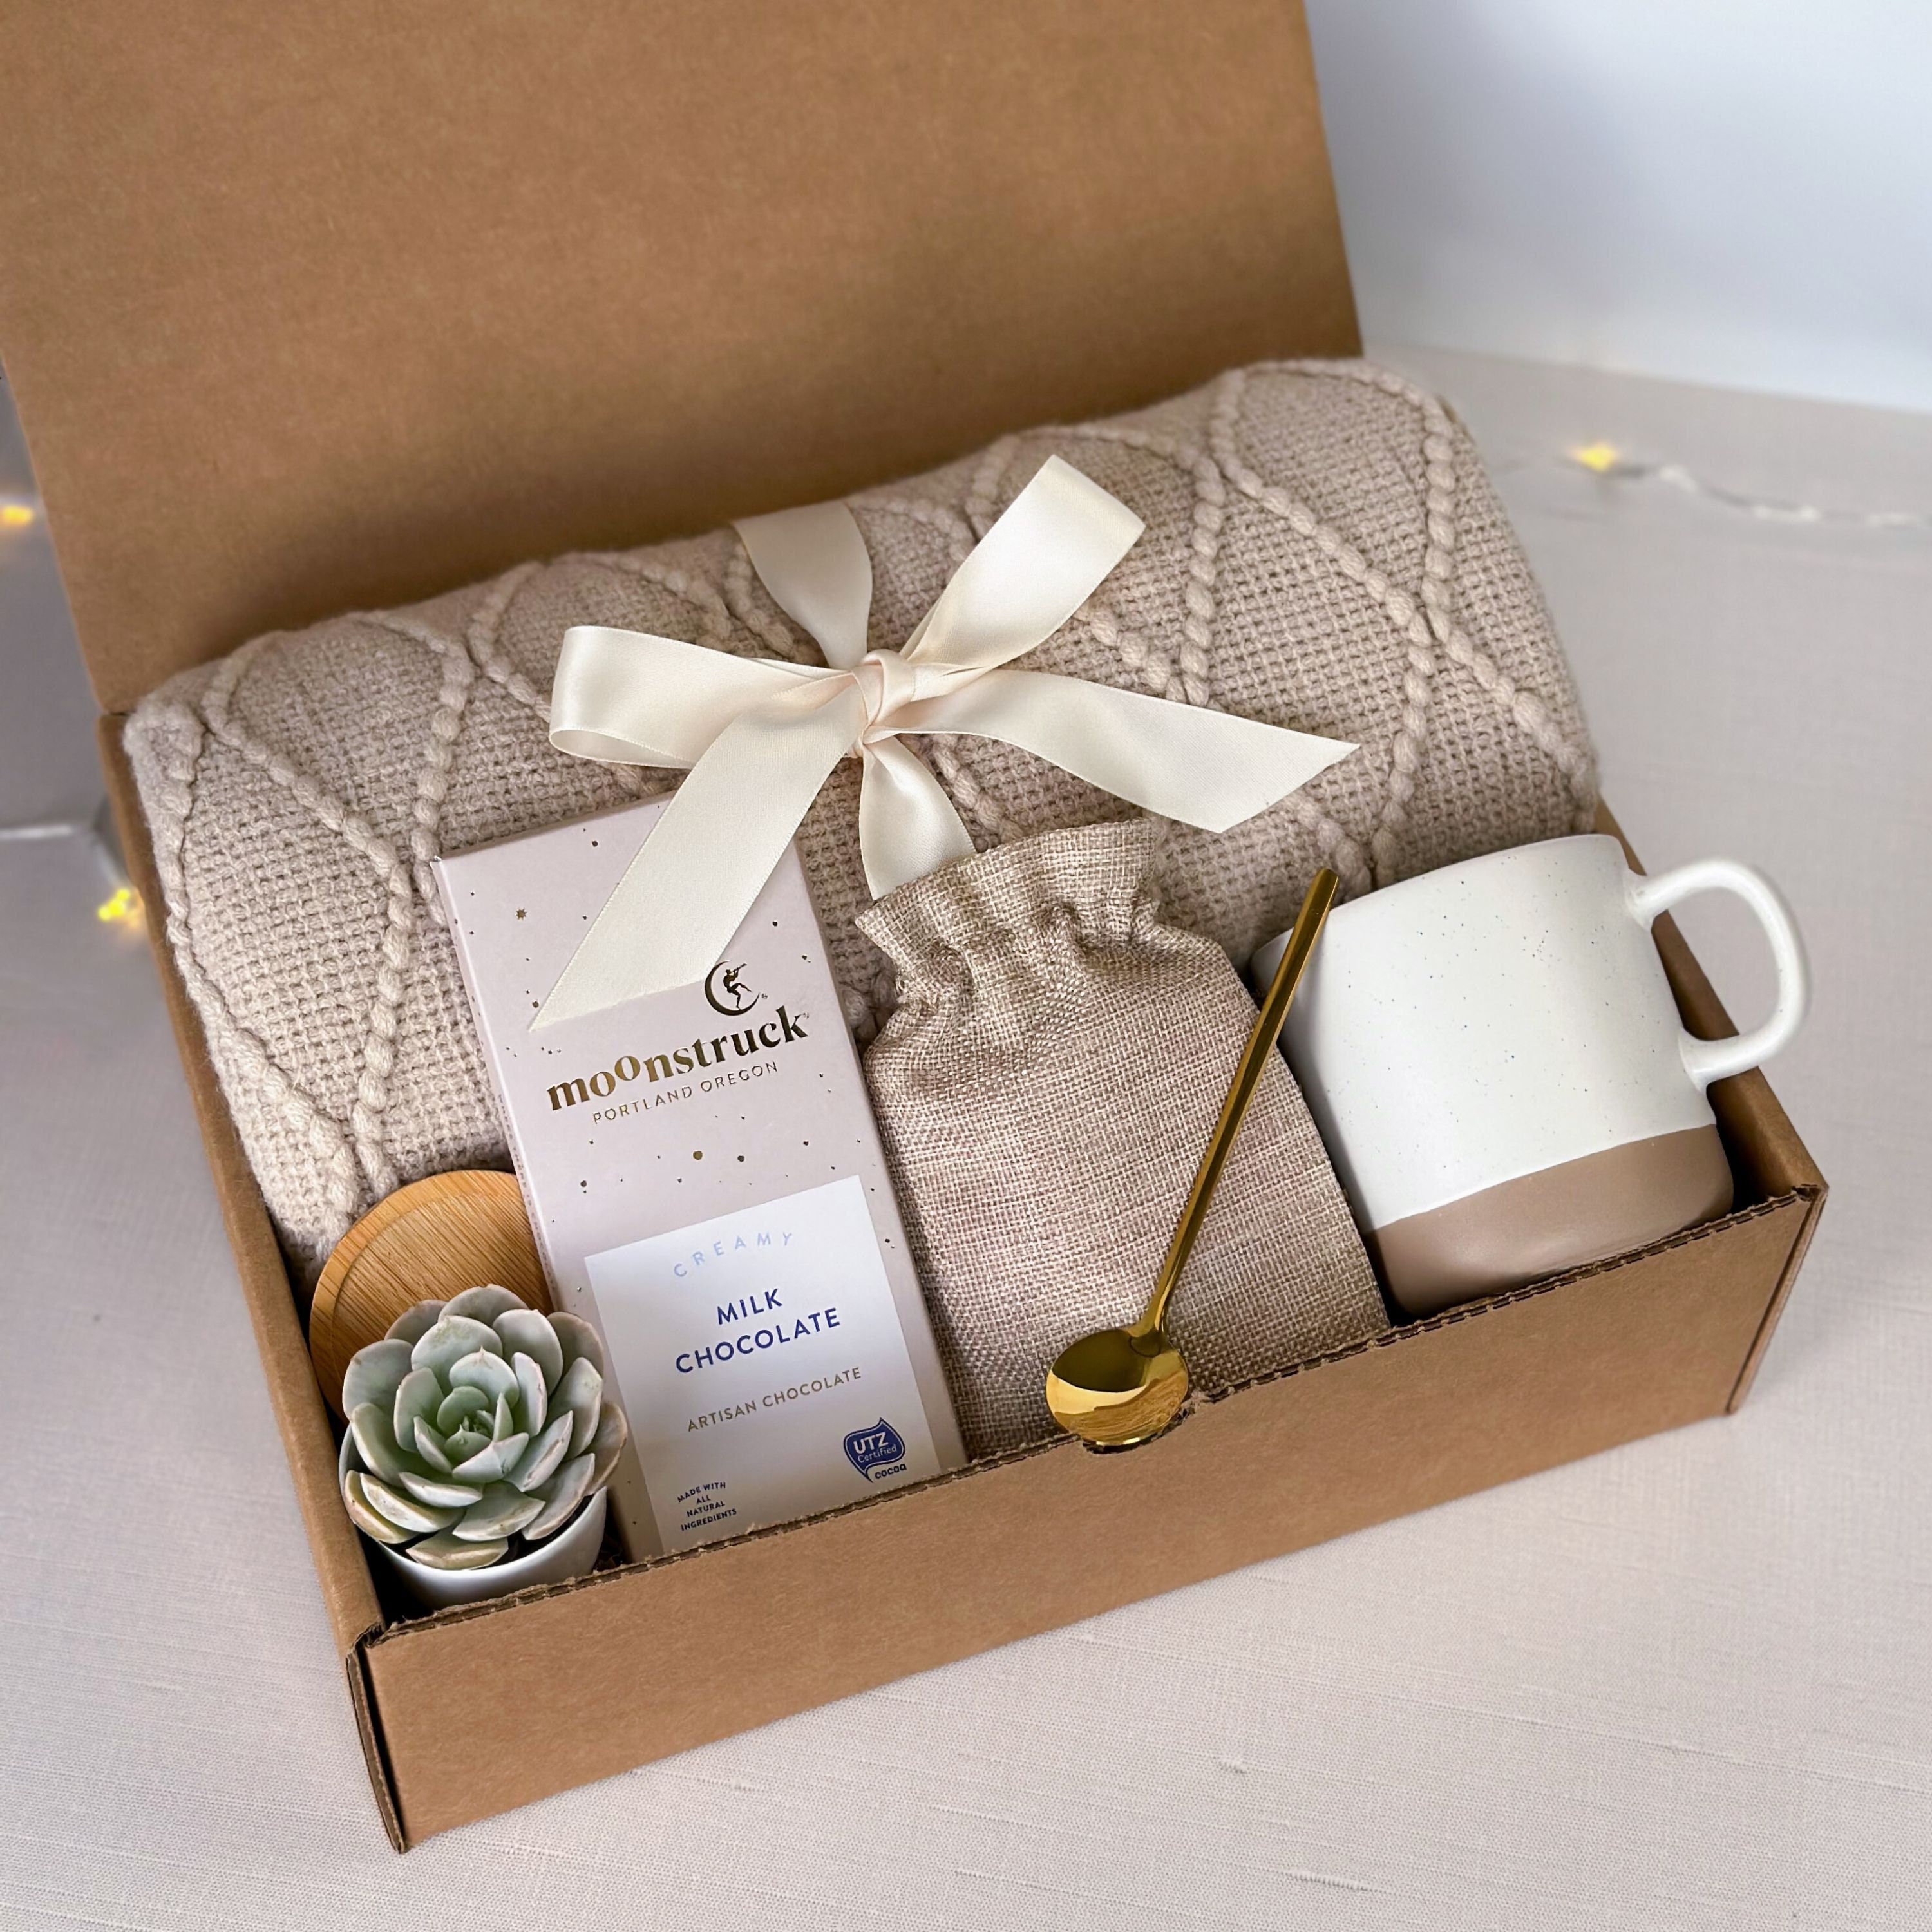 Get Well Soon Gift Box for Her, Pamper Box, Care Package, Pick Me up Gift,  Feel Better Soon Present, Isolation Gift, Covid Gift Set 